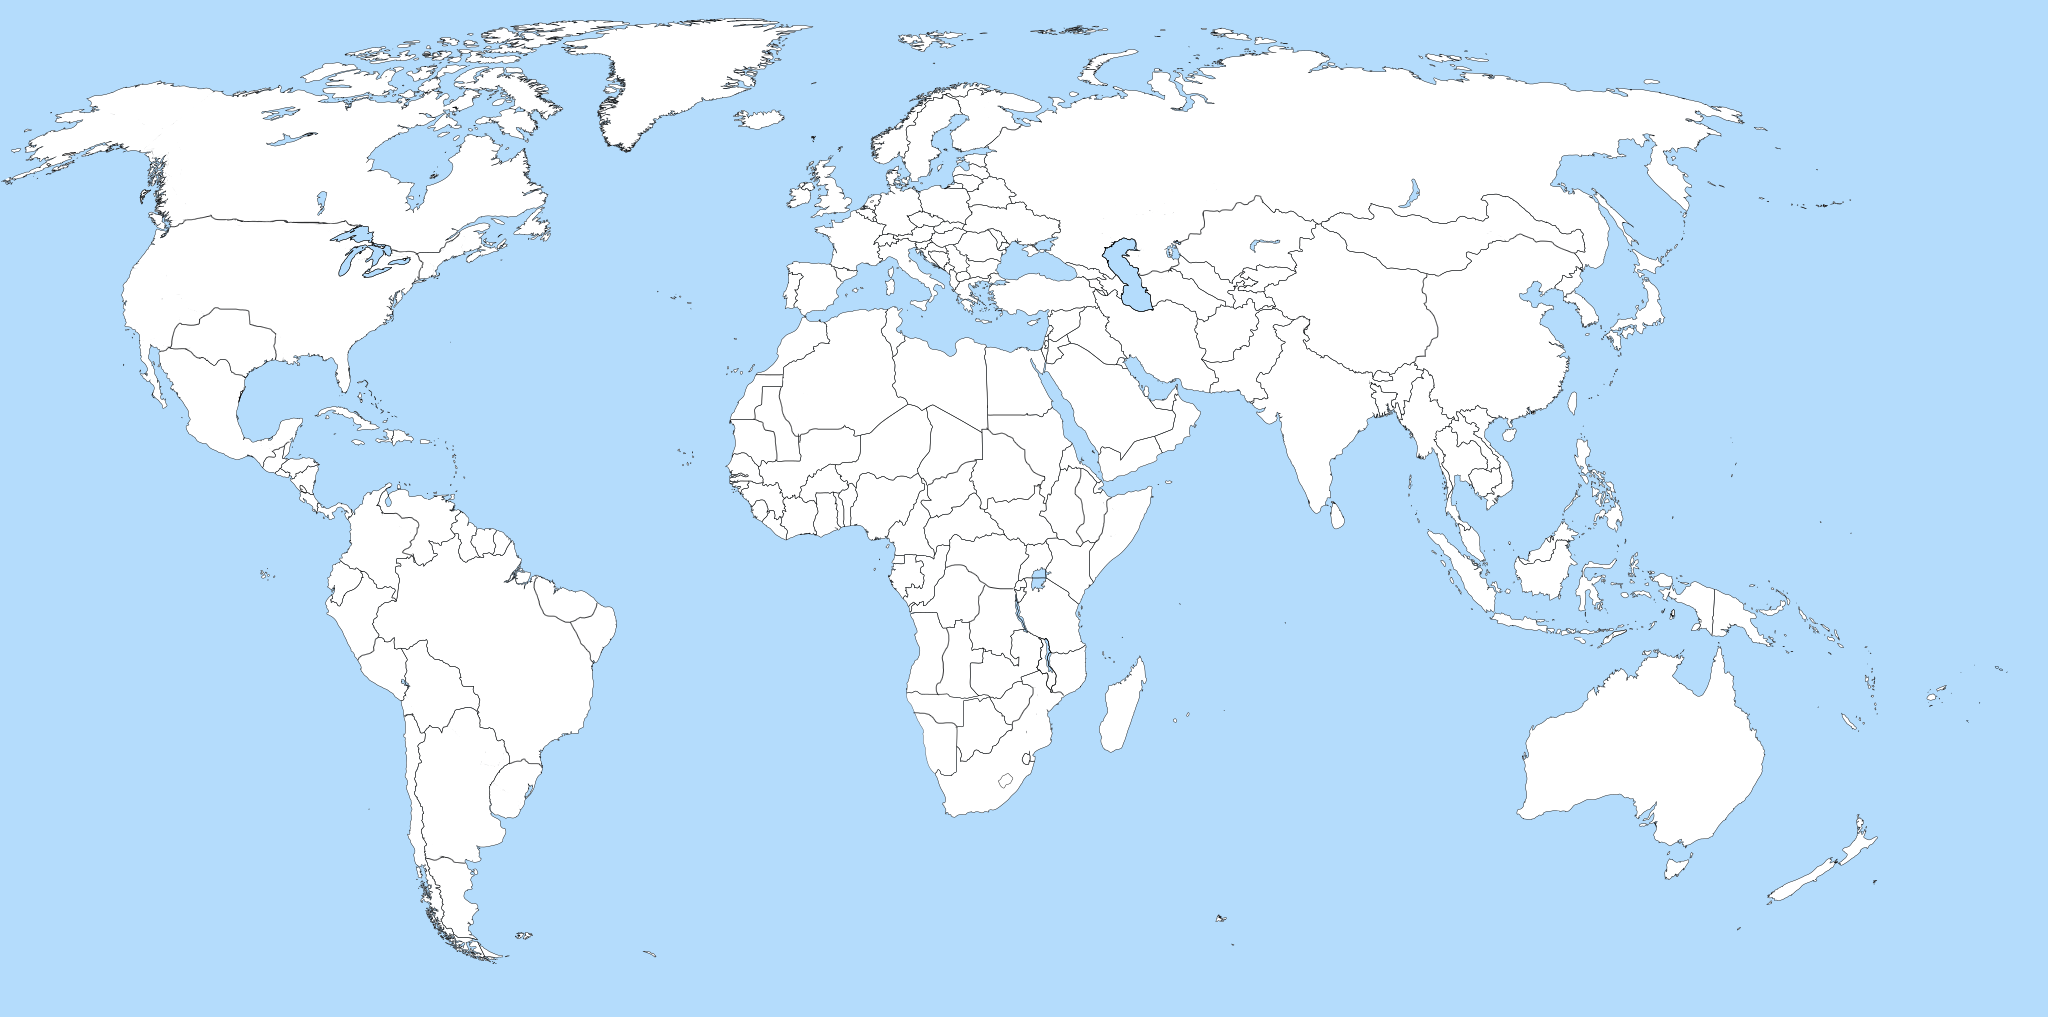 2048px-A_large_blank_world_map_with_oceans_marked_in_blue.svg.png